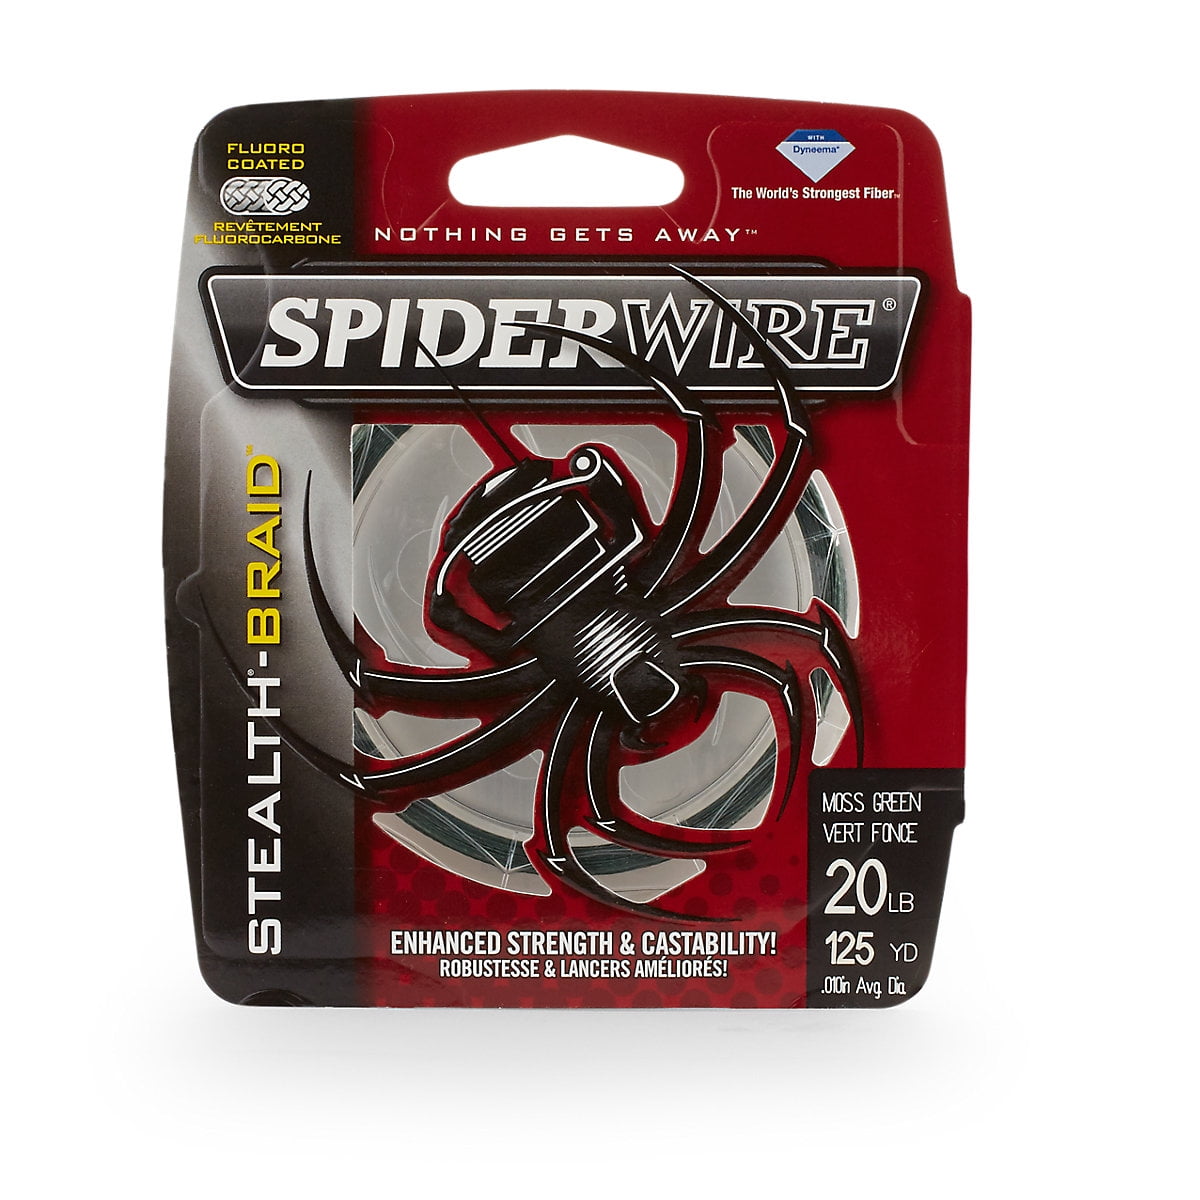 Spiderwire Green Braided Fishing Lines & Leaders 10 lb Line Weight Fishing  for sale